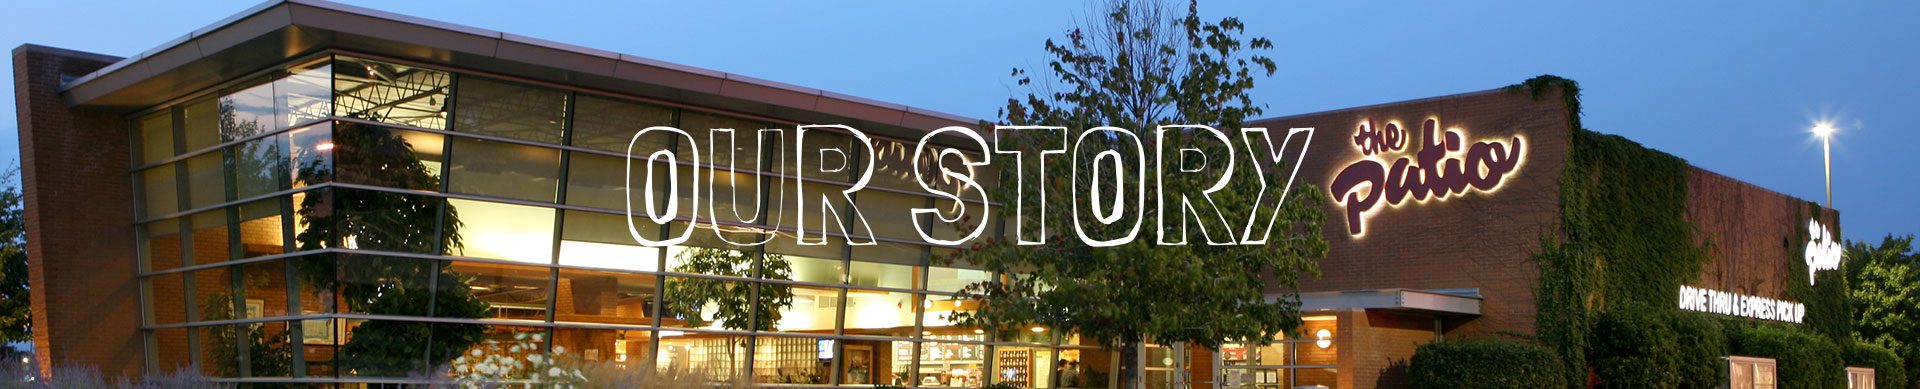 The Patio building with a sign and a text over that says 'Our Story'.